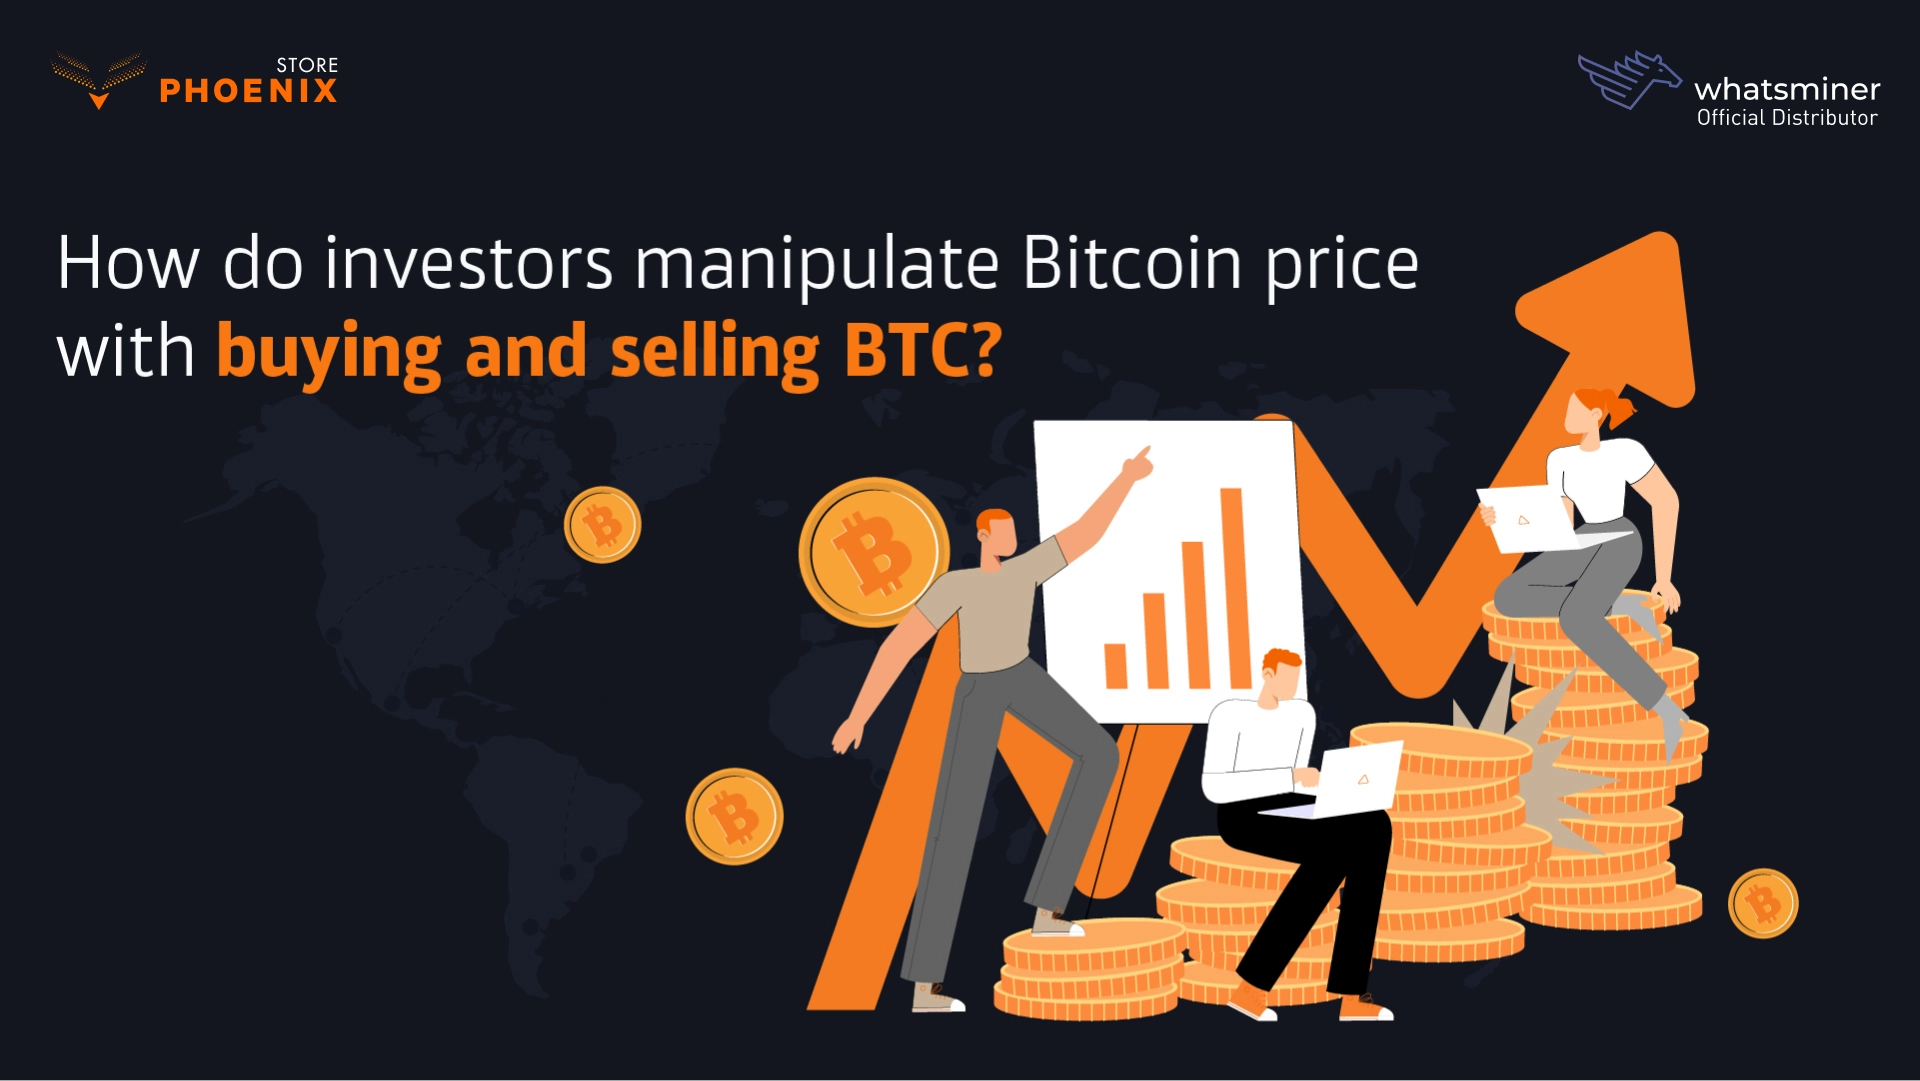 How do Investors manipulate Bitcoin Price with buying and selling BTC?